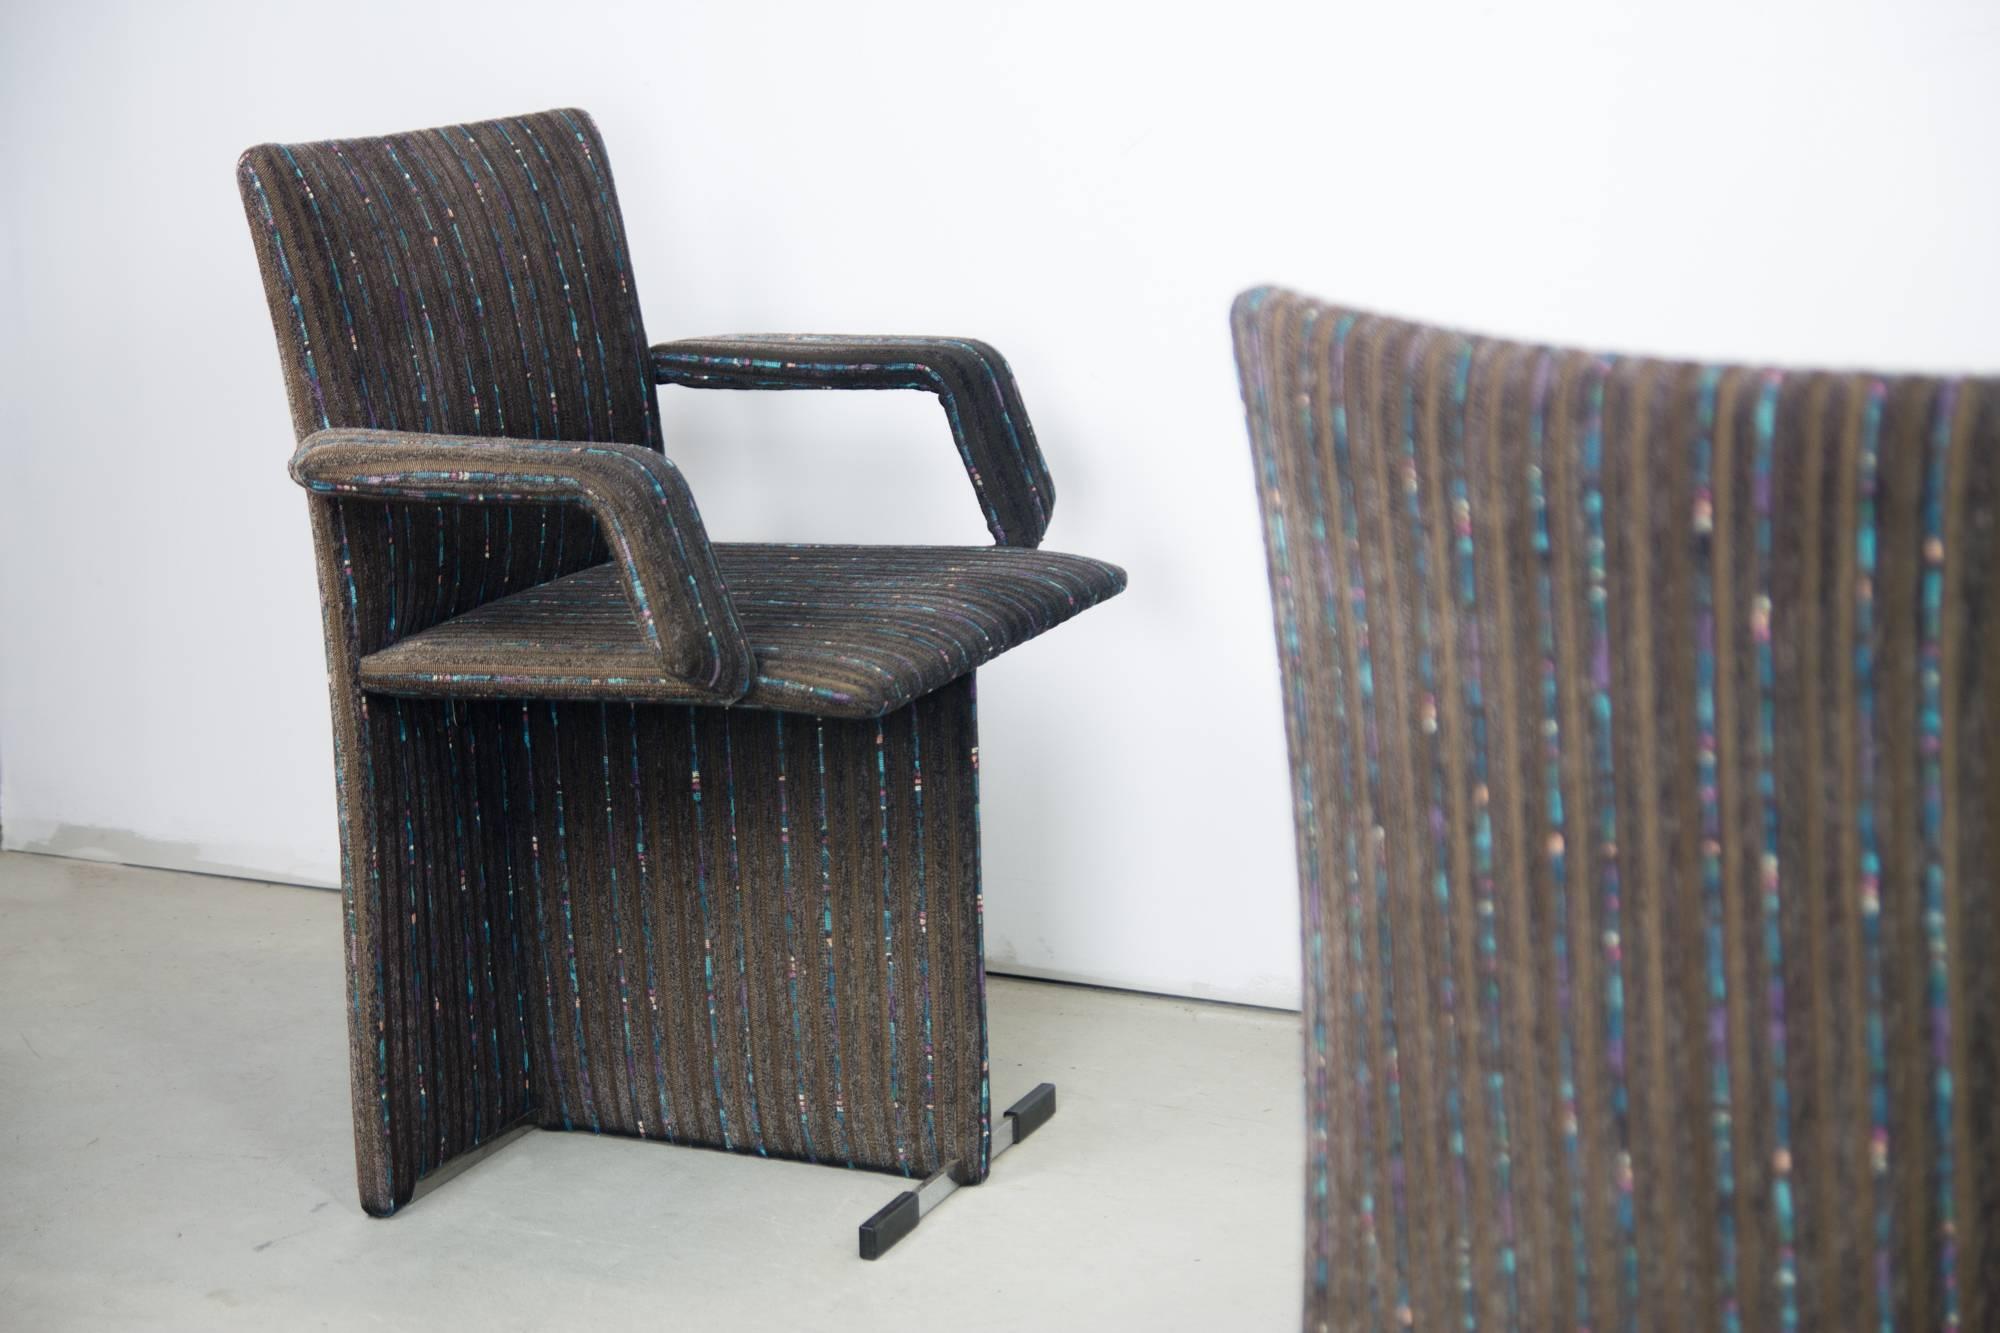 Italian Pair of Upholstered Chairs by Giovanni Offredi for Saporiti